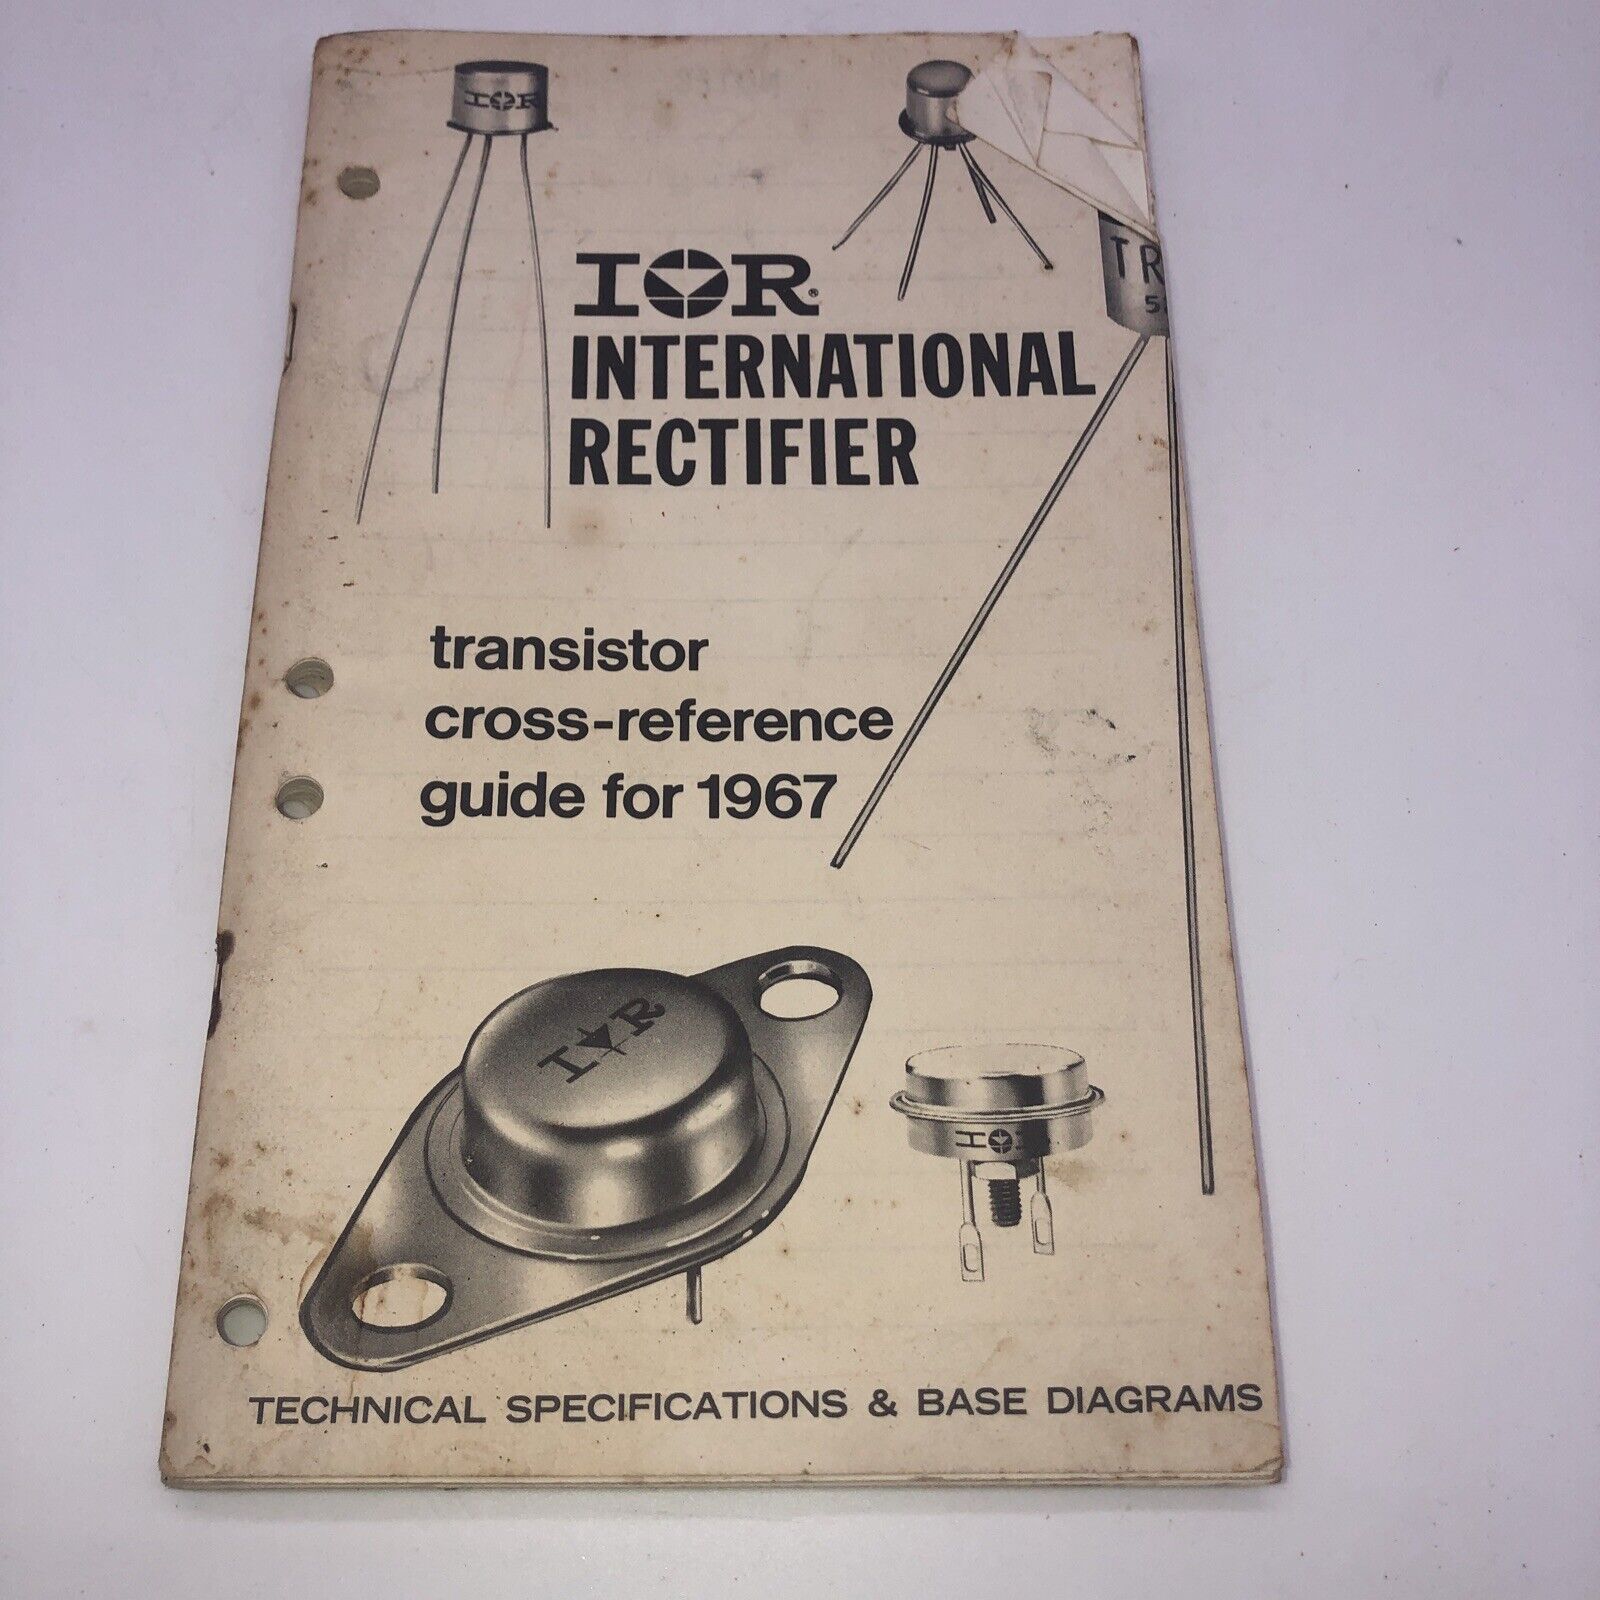 IOR INTERNATIONAL RECTIFIER TRANSISTER CROSS REFERENCE GUIDE 1967